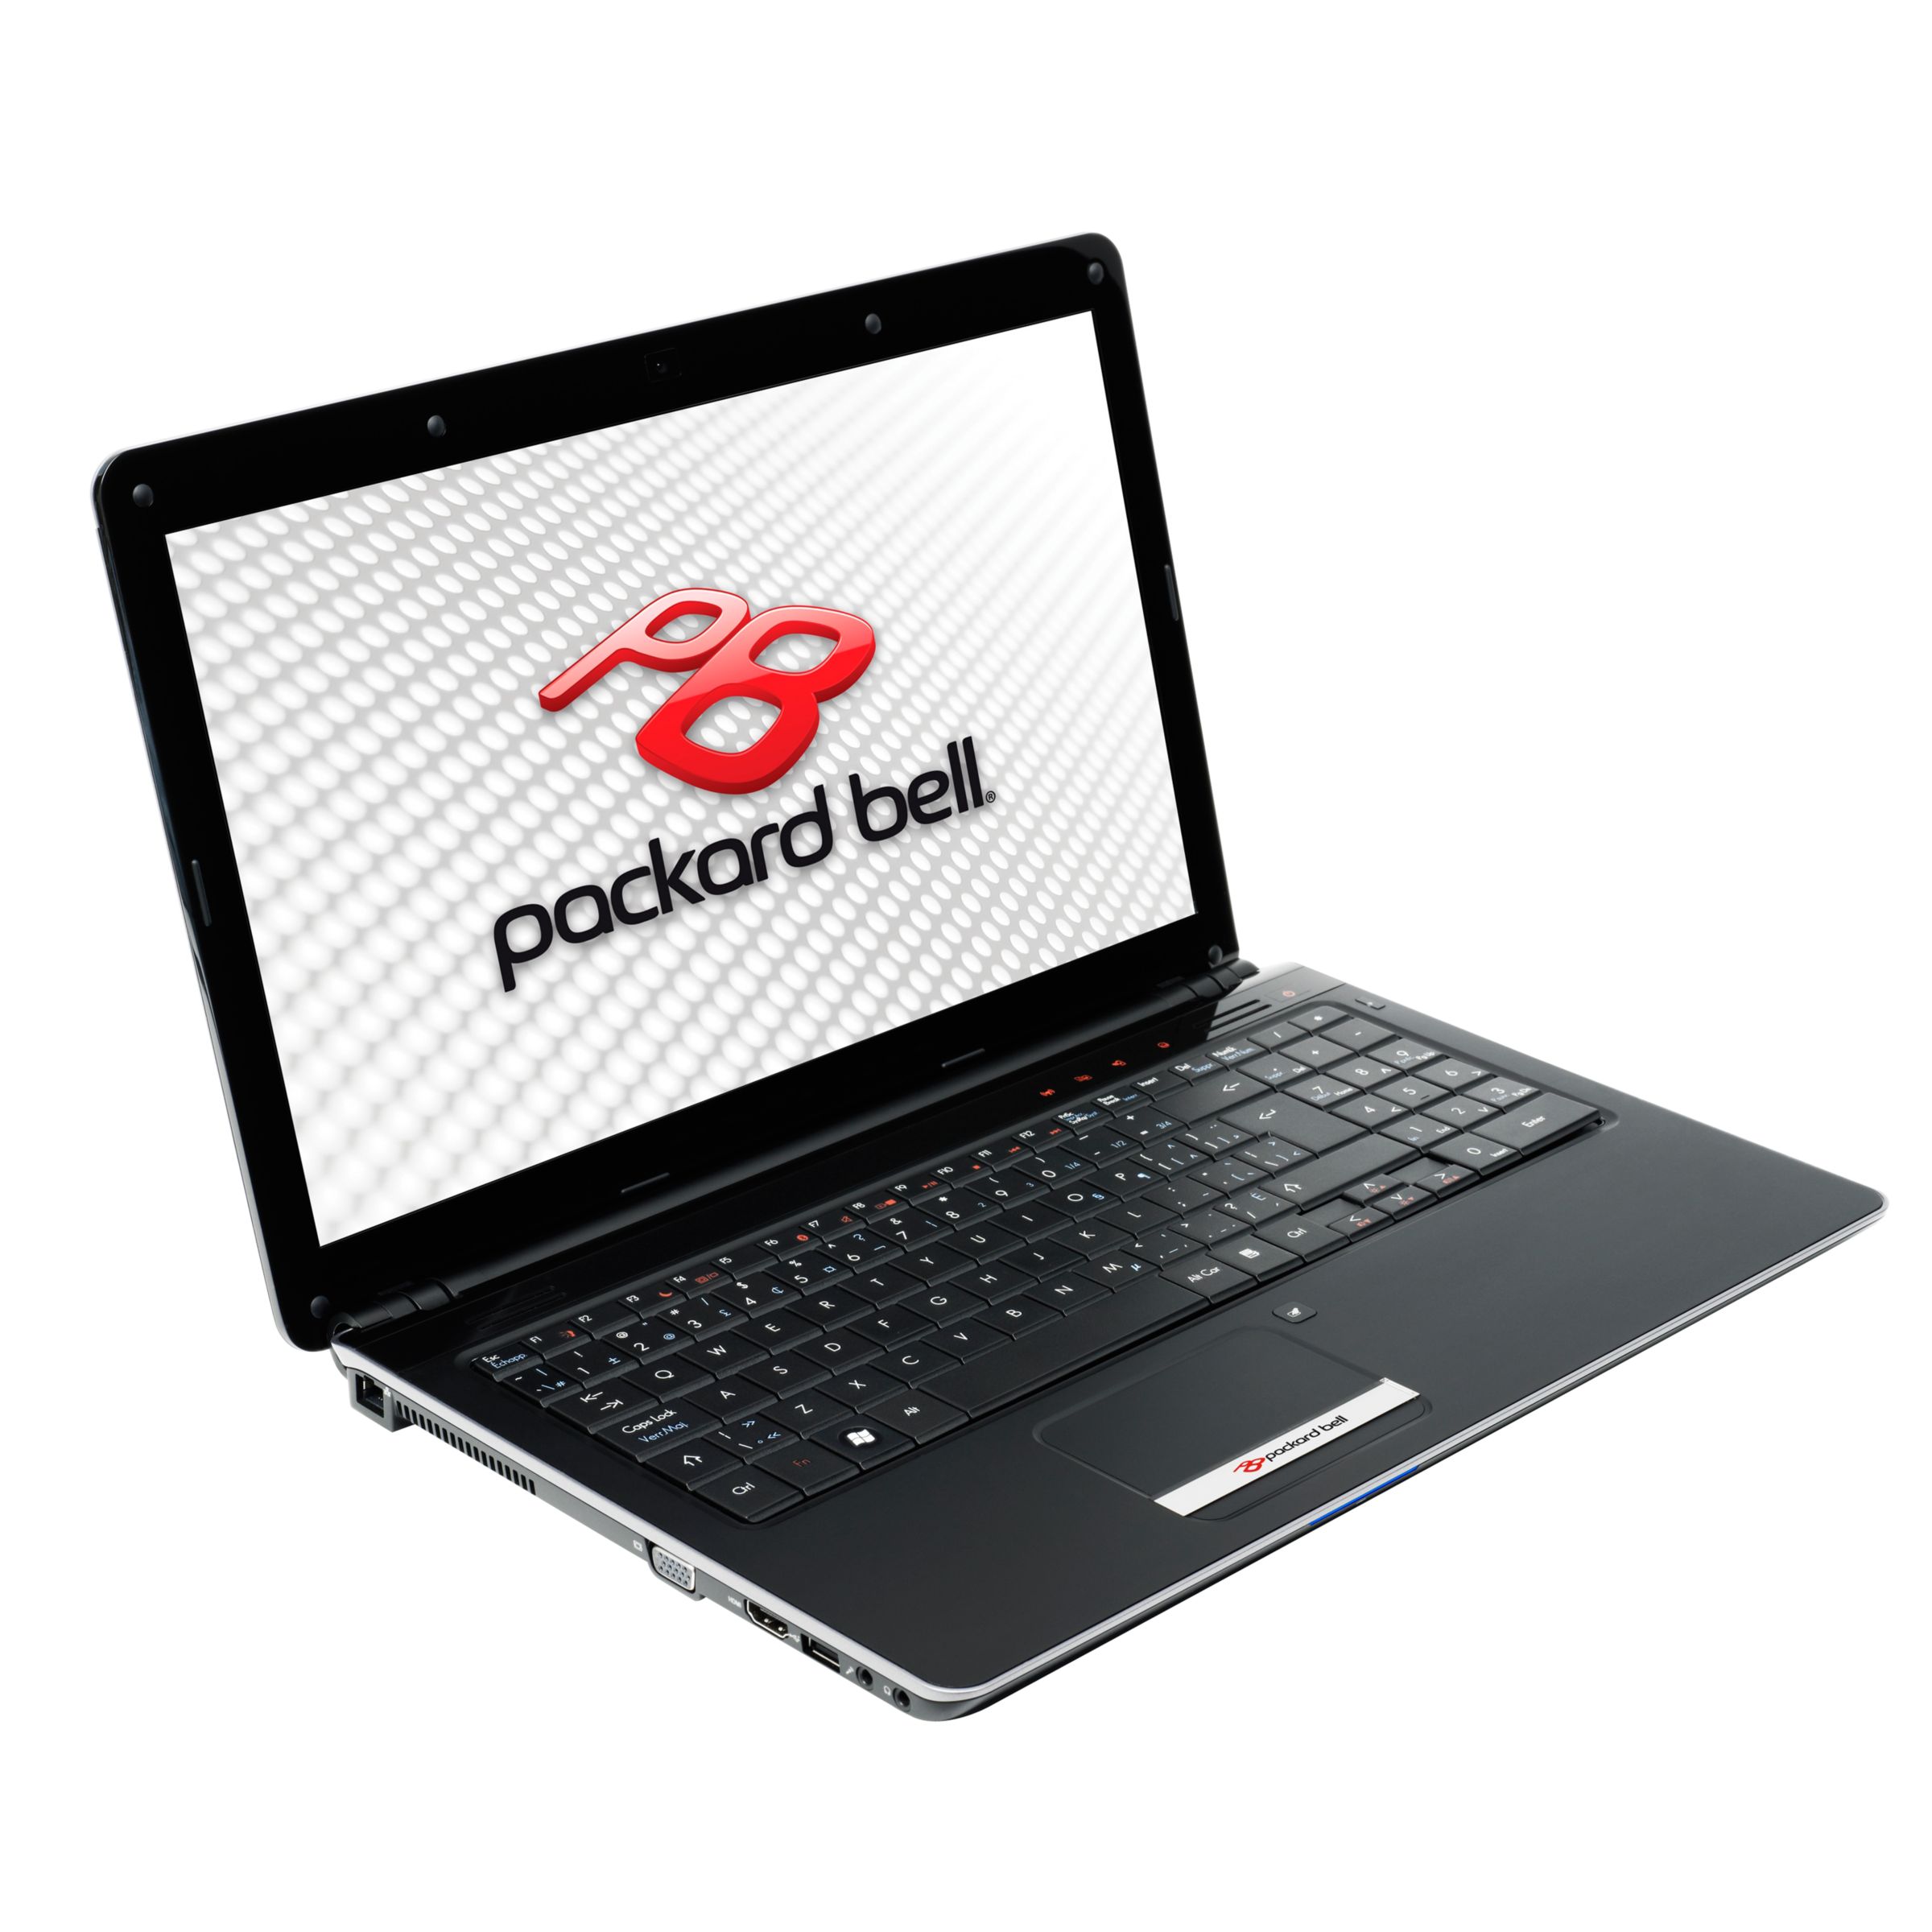 Packard Bell Butterfly M-FM-006 Laptop, Intel Core 2, 500GB, 1.4GHz, 4GB RAM with 15.6 Inch Display at John Lewis